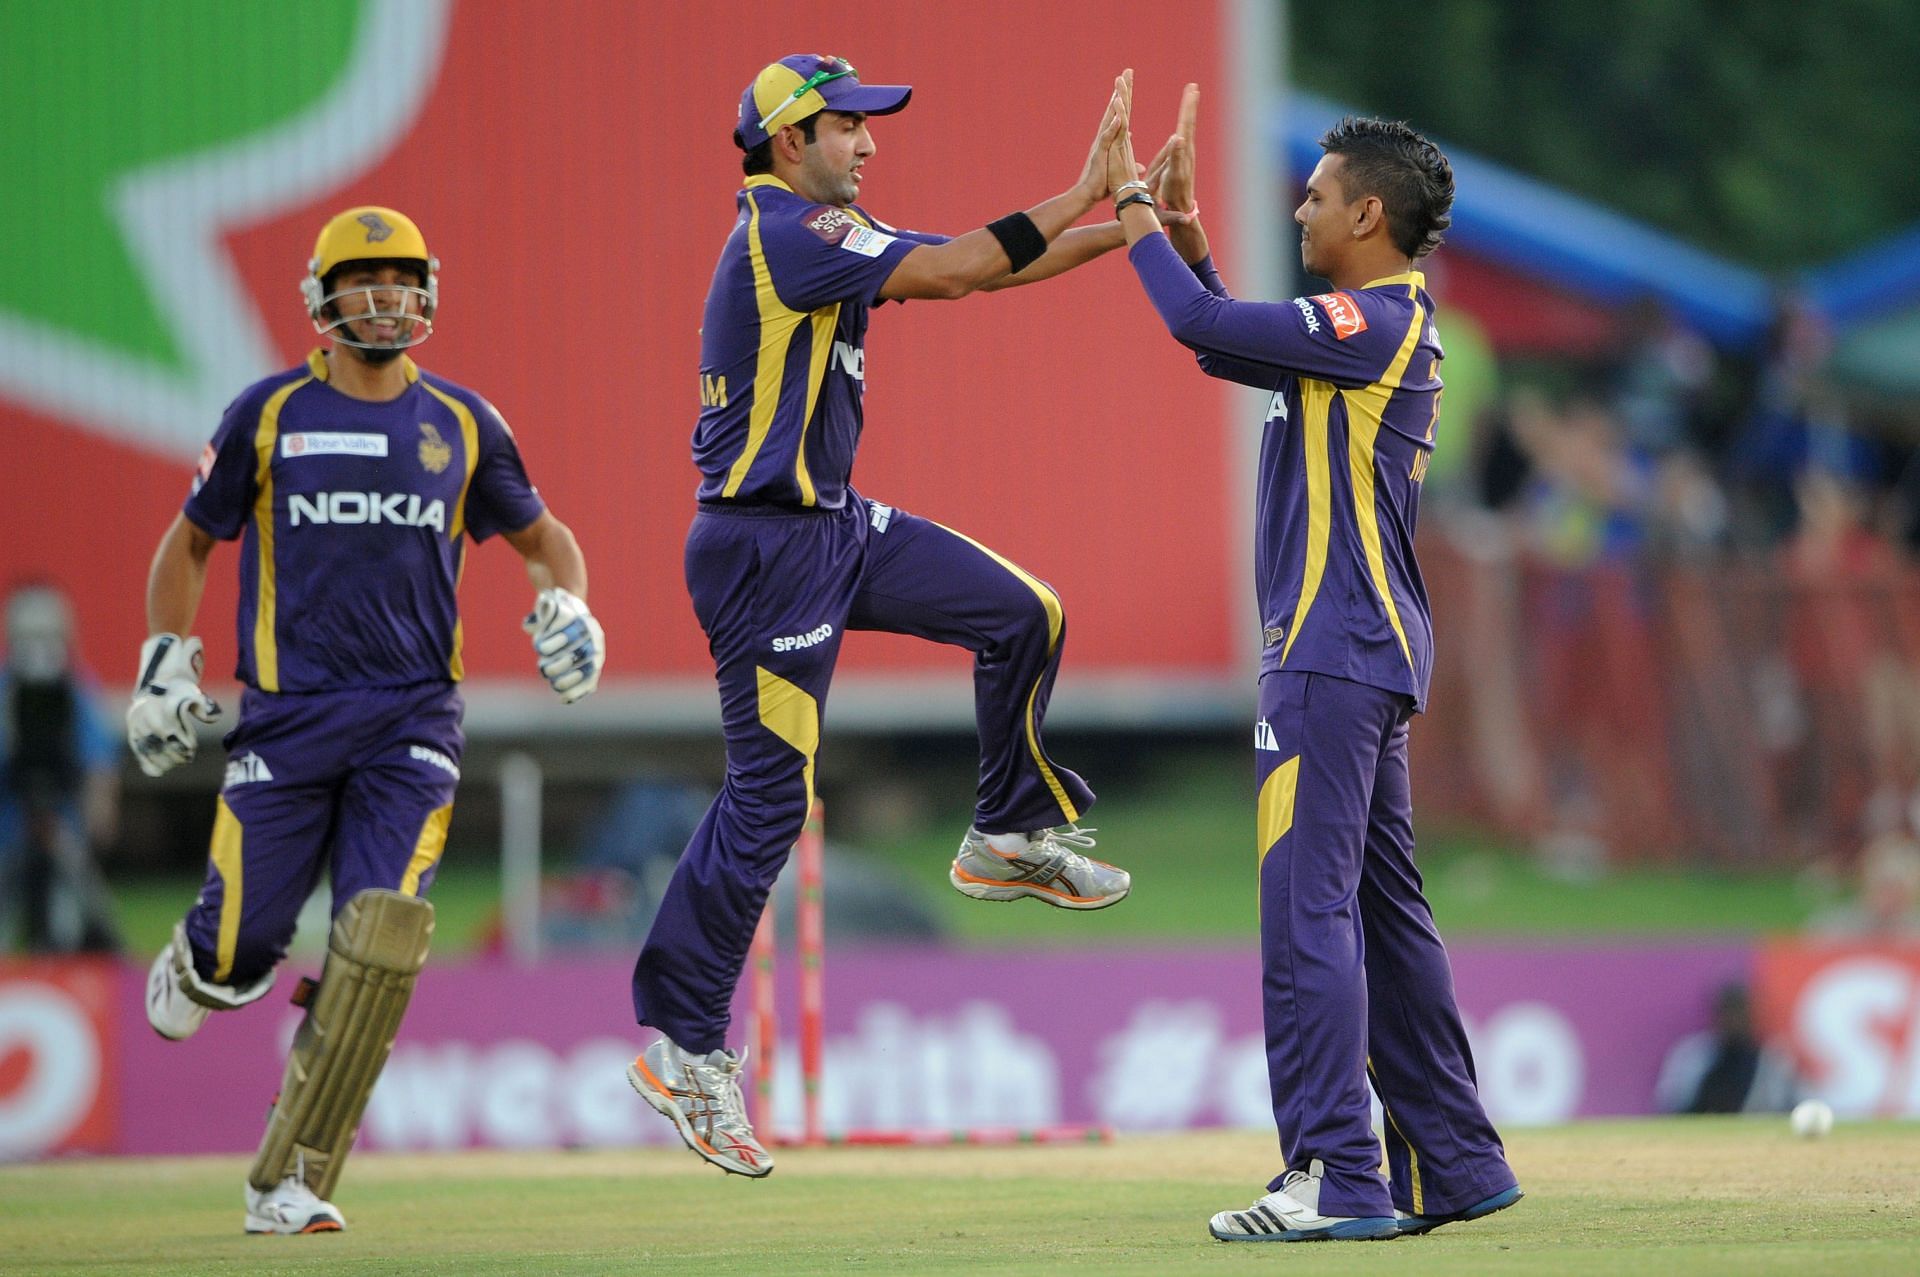 Sunil Narine used his craftiness to win a match for KKR [File Photo]